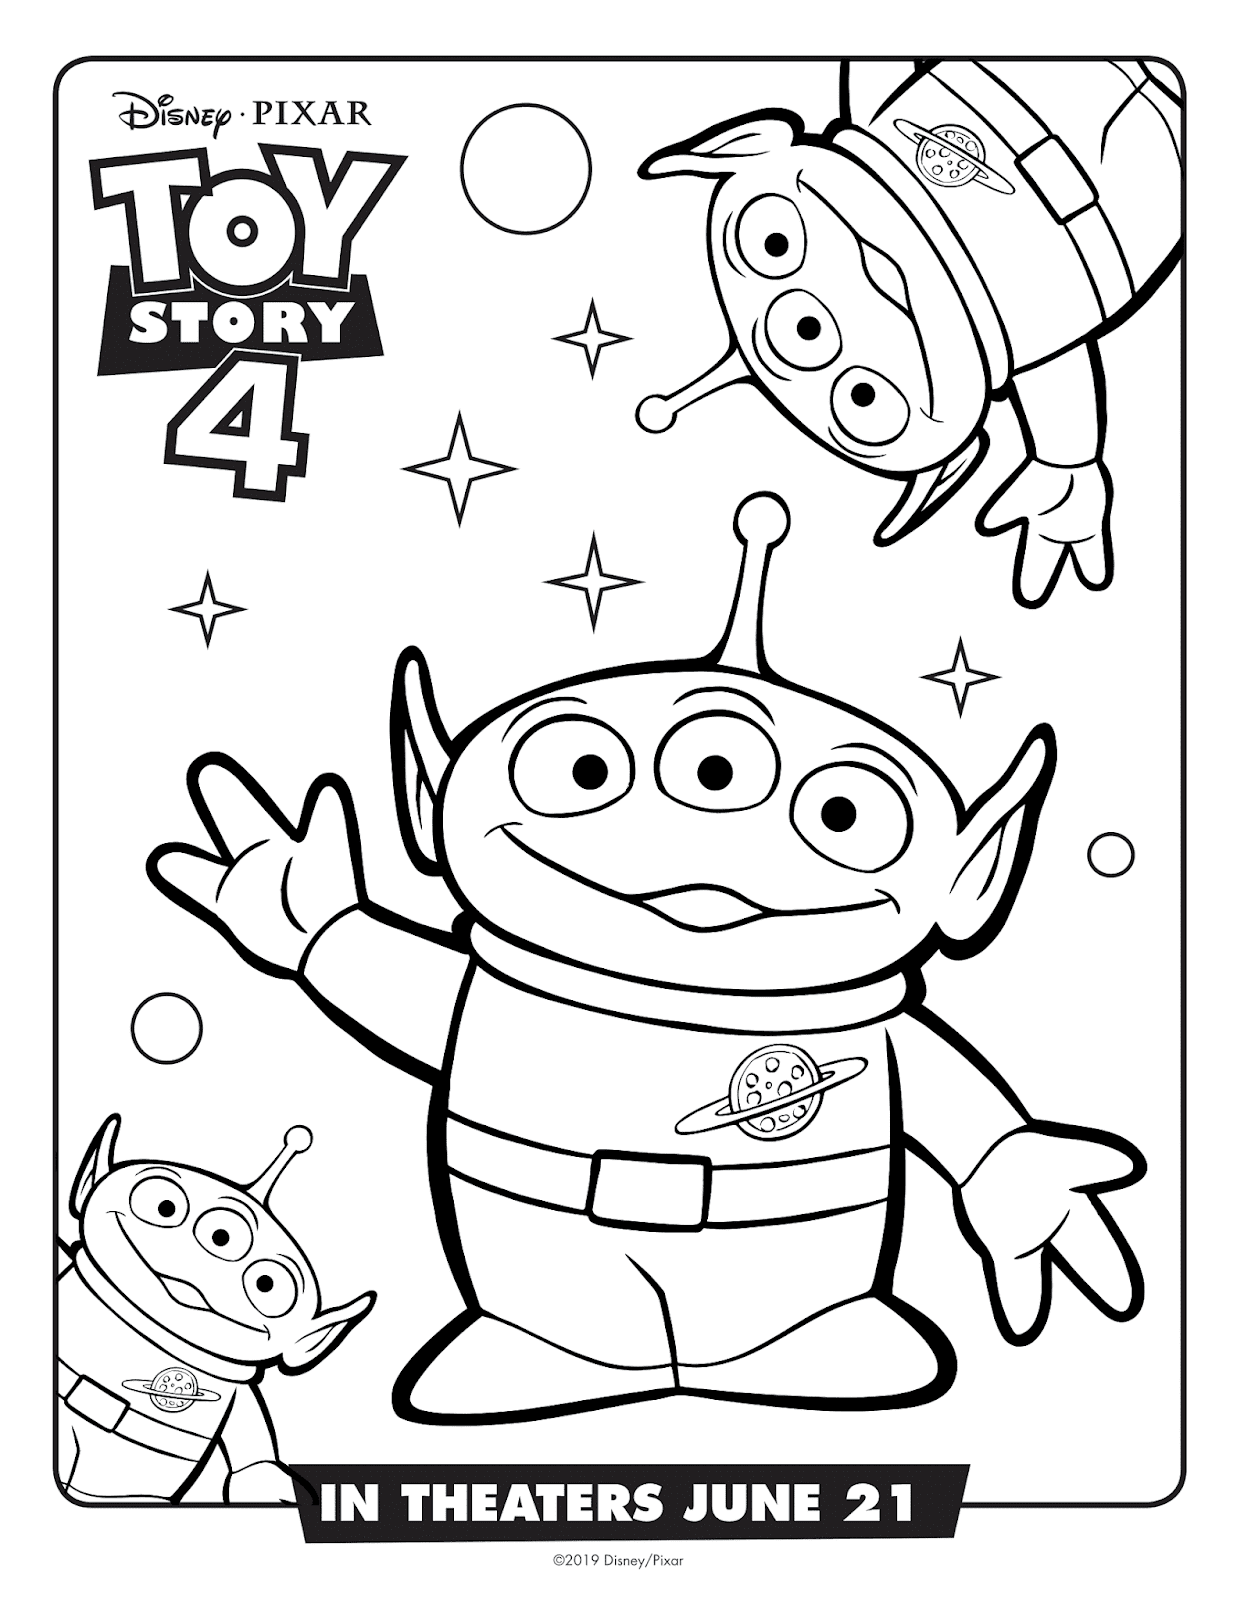 12+ Disney Toy Story 3 Coloring Pages You Must Know - Ww2 Coloring ...